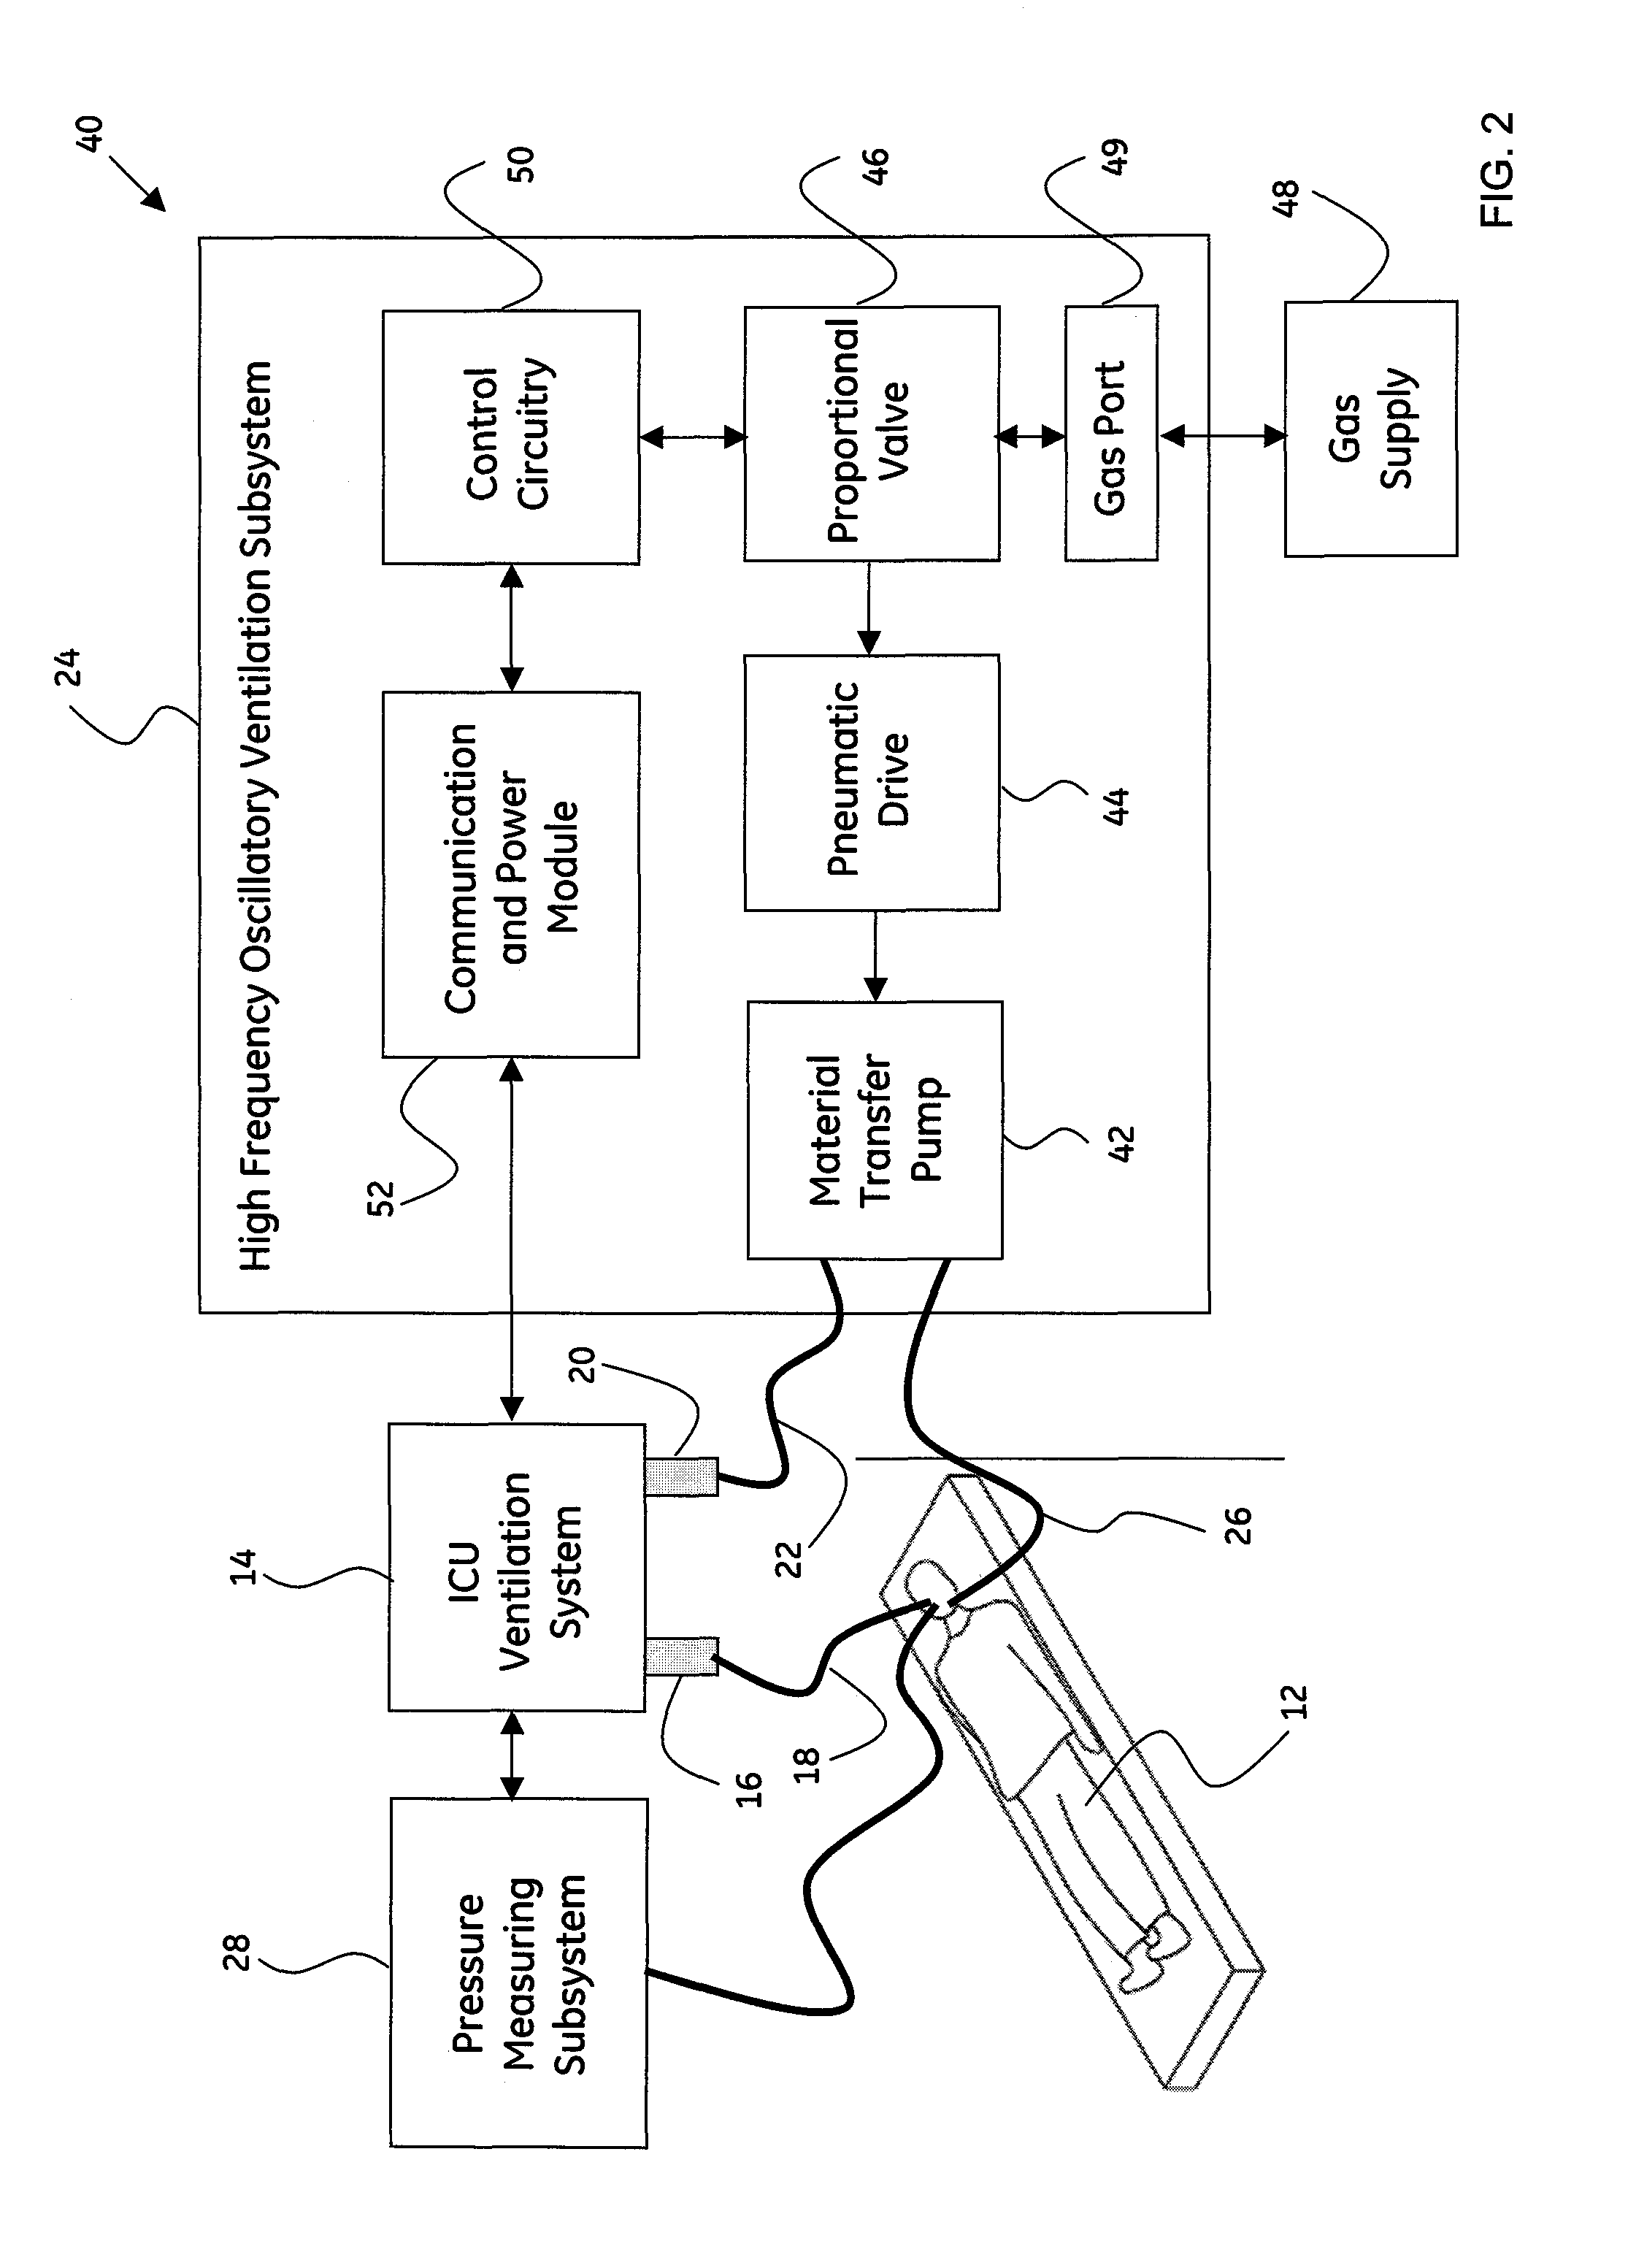 System and method for integrated high frequency oscillatory ventilation